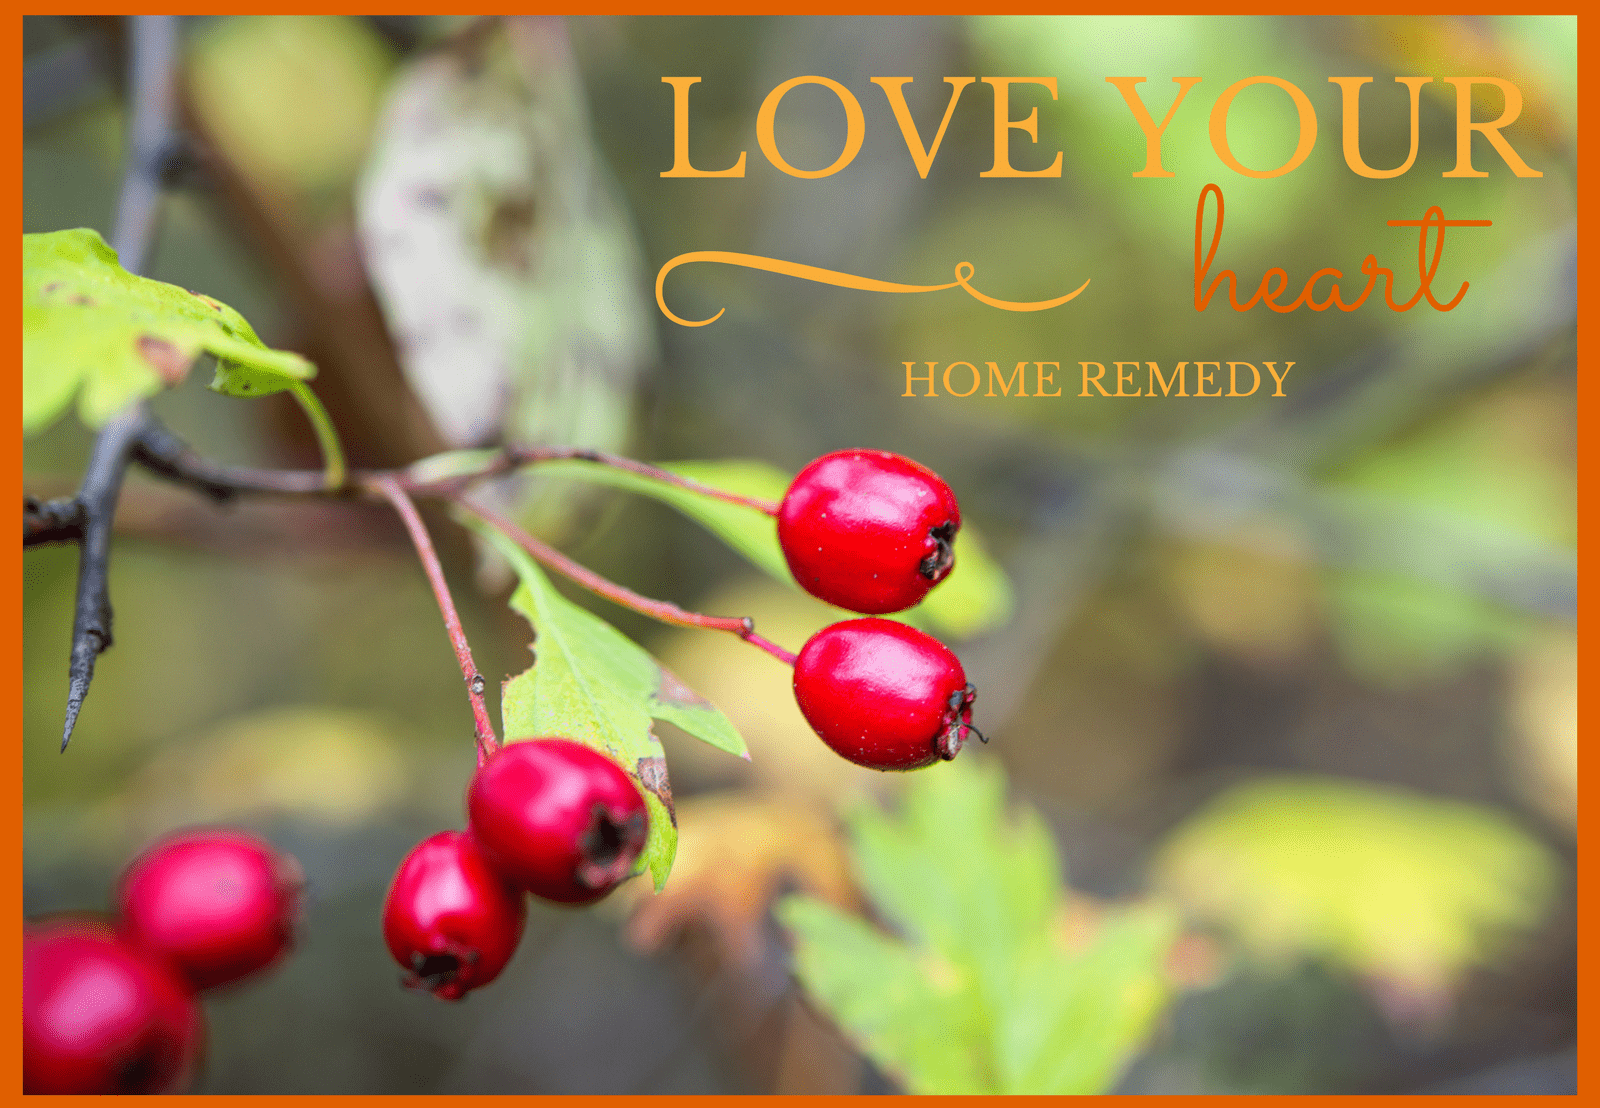 Love Your Heart Home Remedy